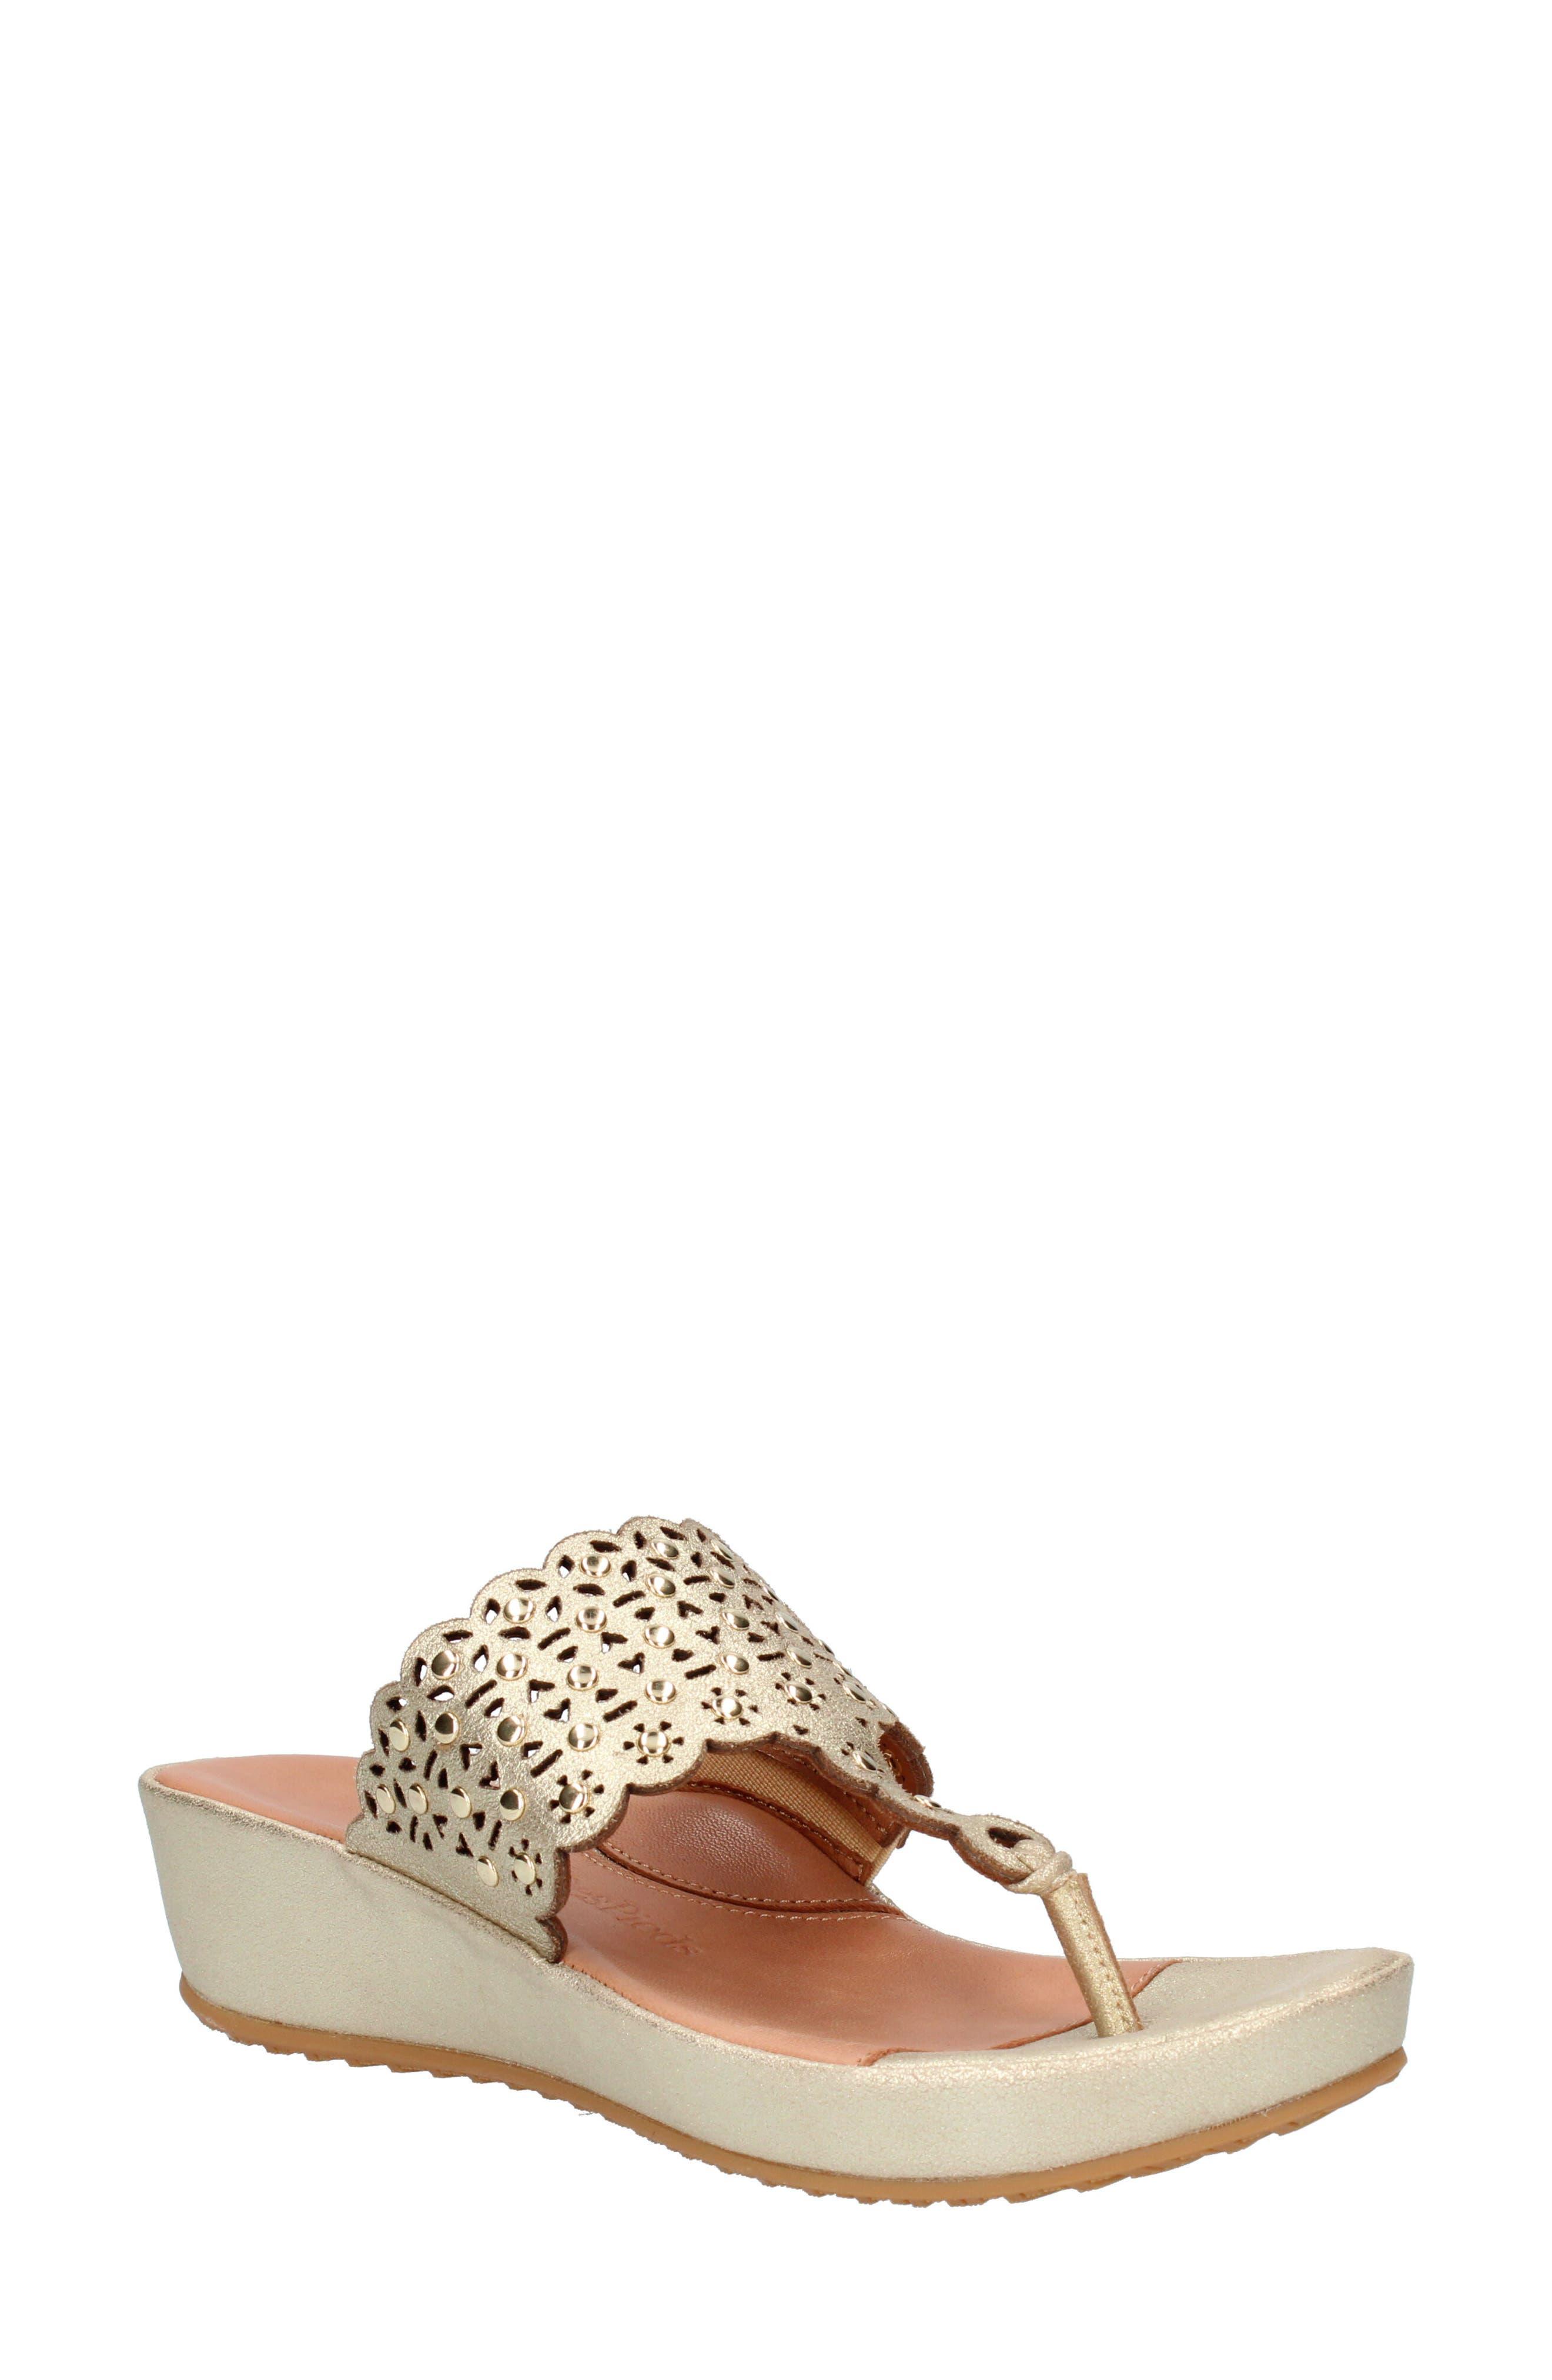 L'amour Des Pieds Chuxley Wedge Flip Flop in Brown | Lyst